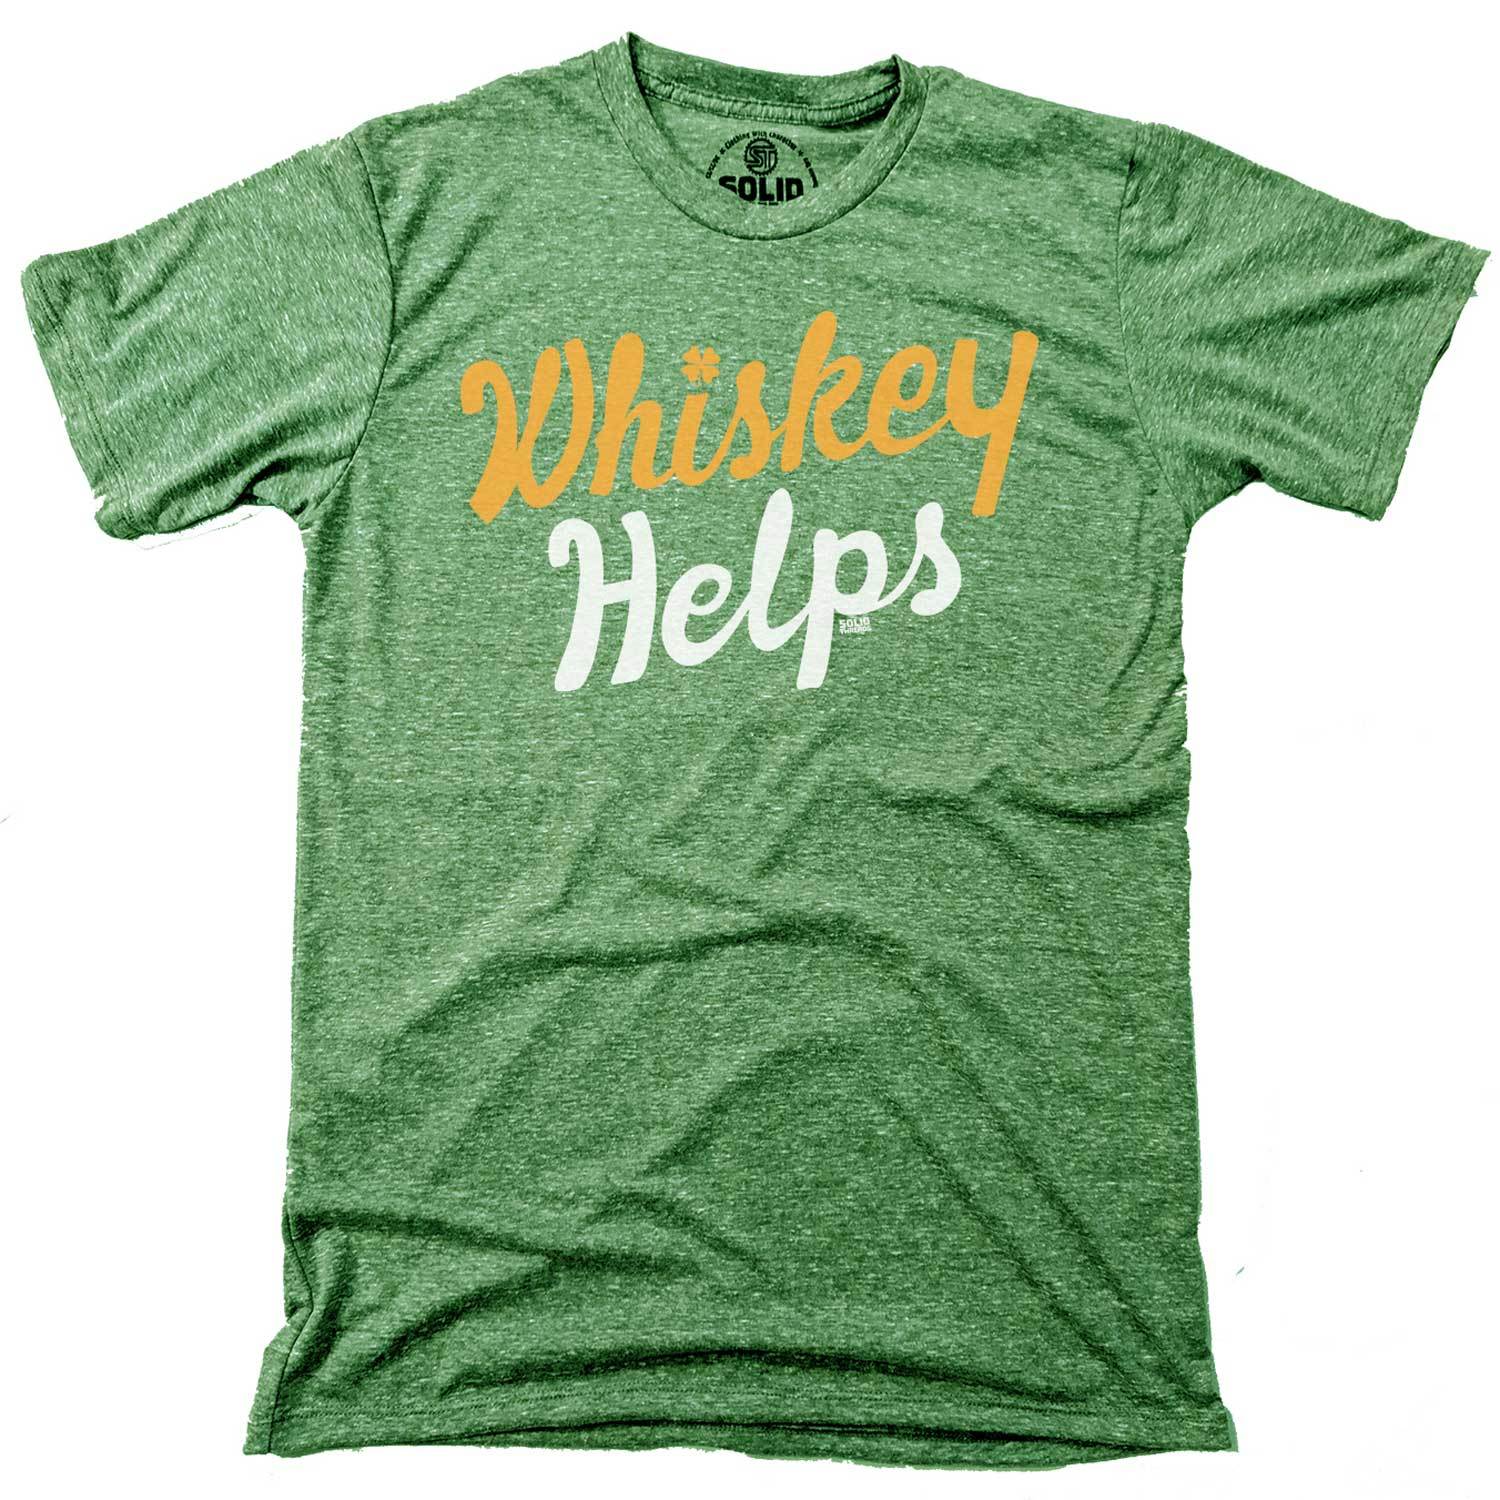 Men's Irish Whiskey Helps Vintage Graphic Tee | Funny Drinking T-shirt on Model | Solid Threads